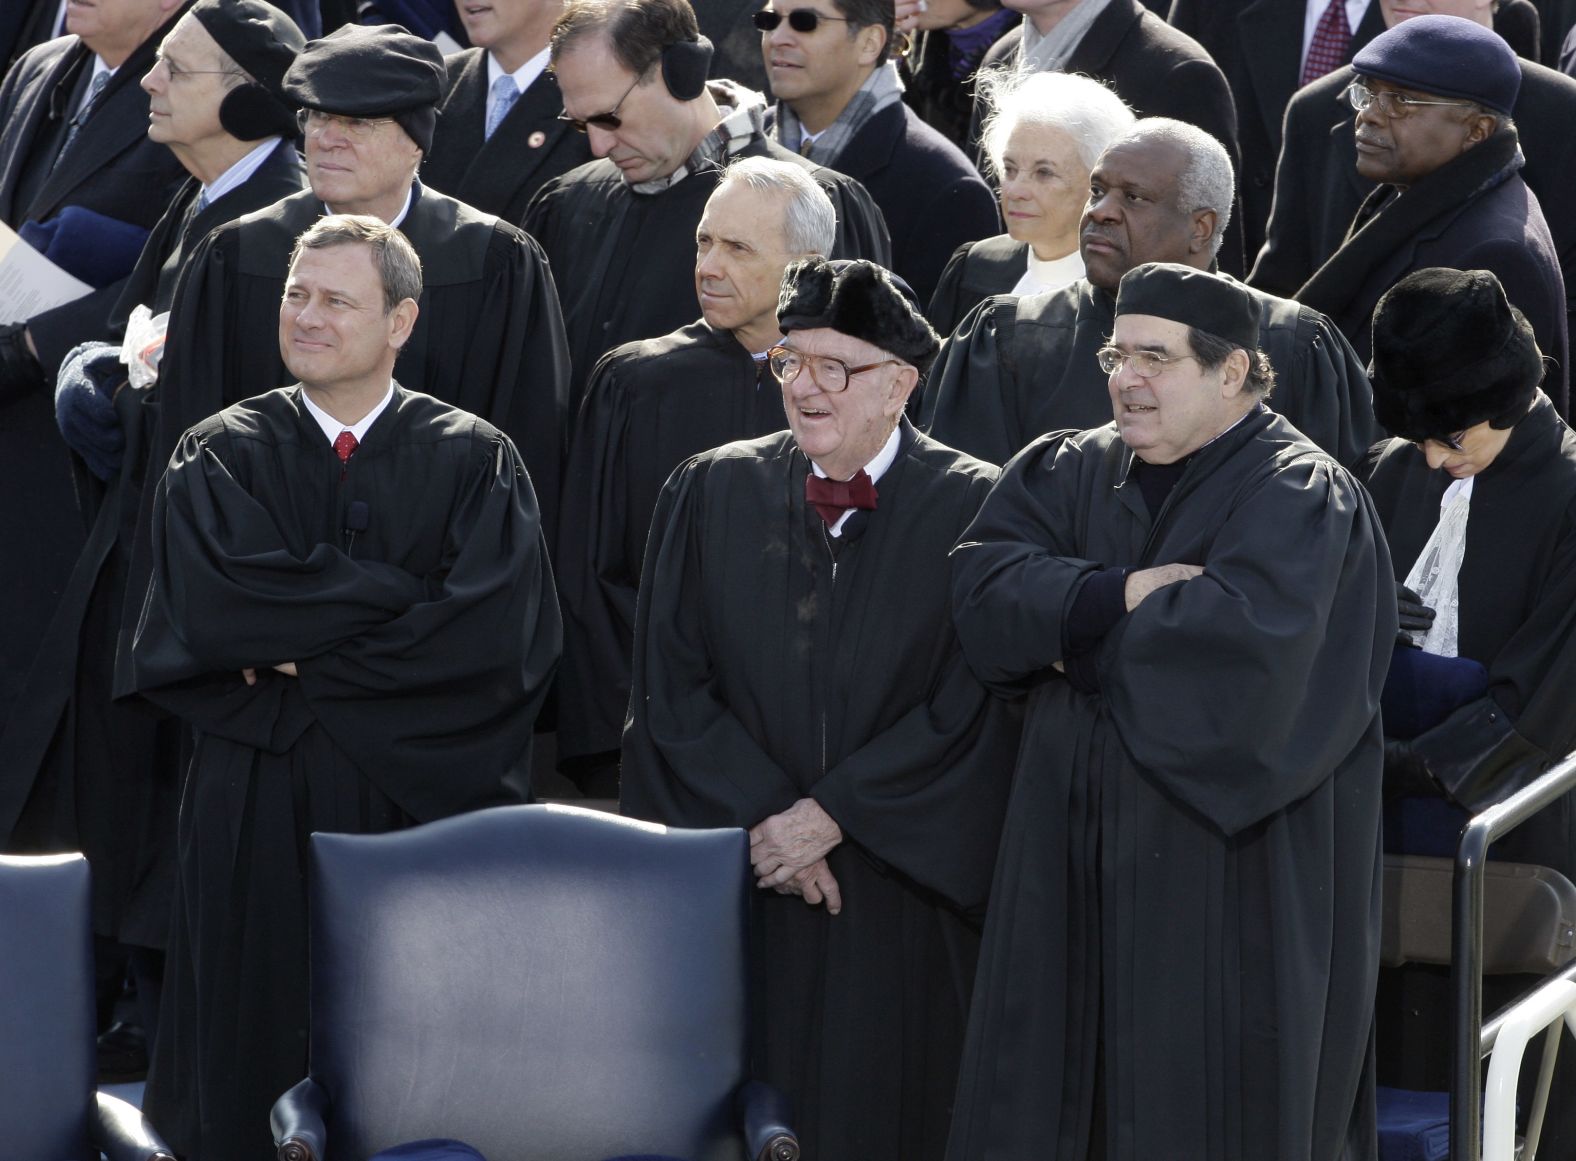 From left, Supreme Court Chief Justice John Roberts, Stevens and Justice Antonin Scalia are seen during President Barack Obama's inauguration on January 20, 2009.